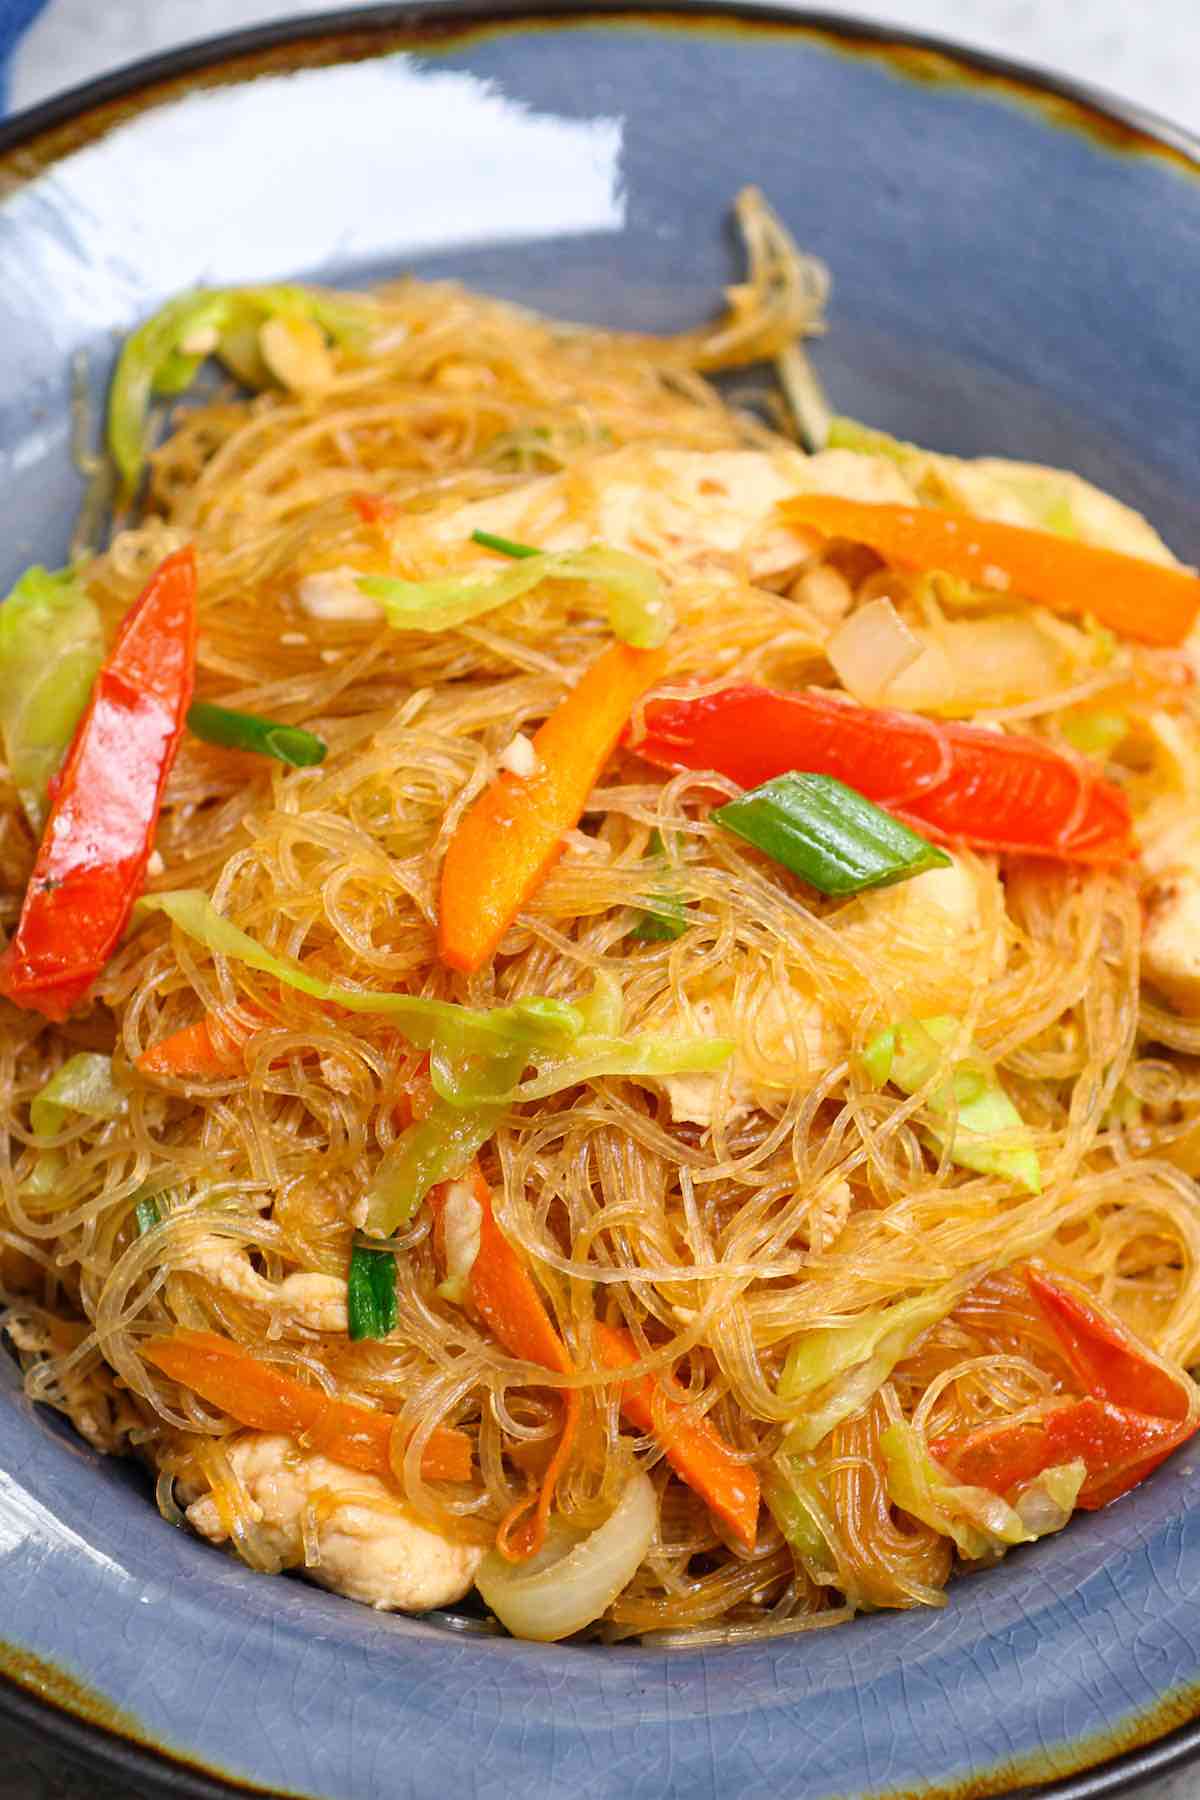 These stir-fried Bean Thread Noodles feature slices of savory chicken, crisp veggies, and tender noodles tossed in a flavorful sauce. It’s a delicious one-dish meal that is ready to eat in just 30 minutes.